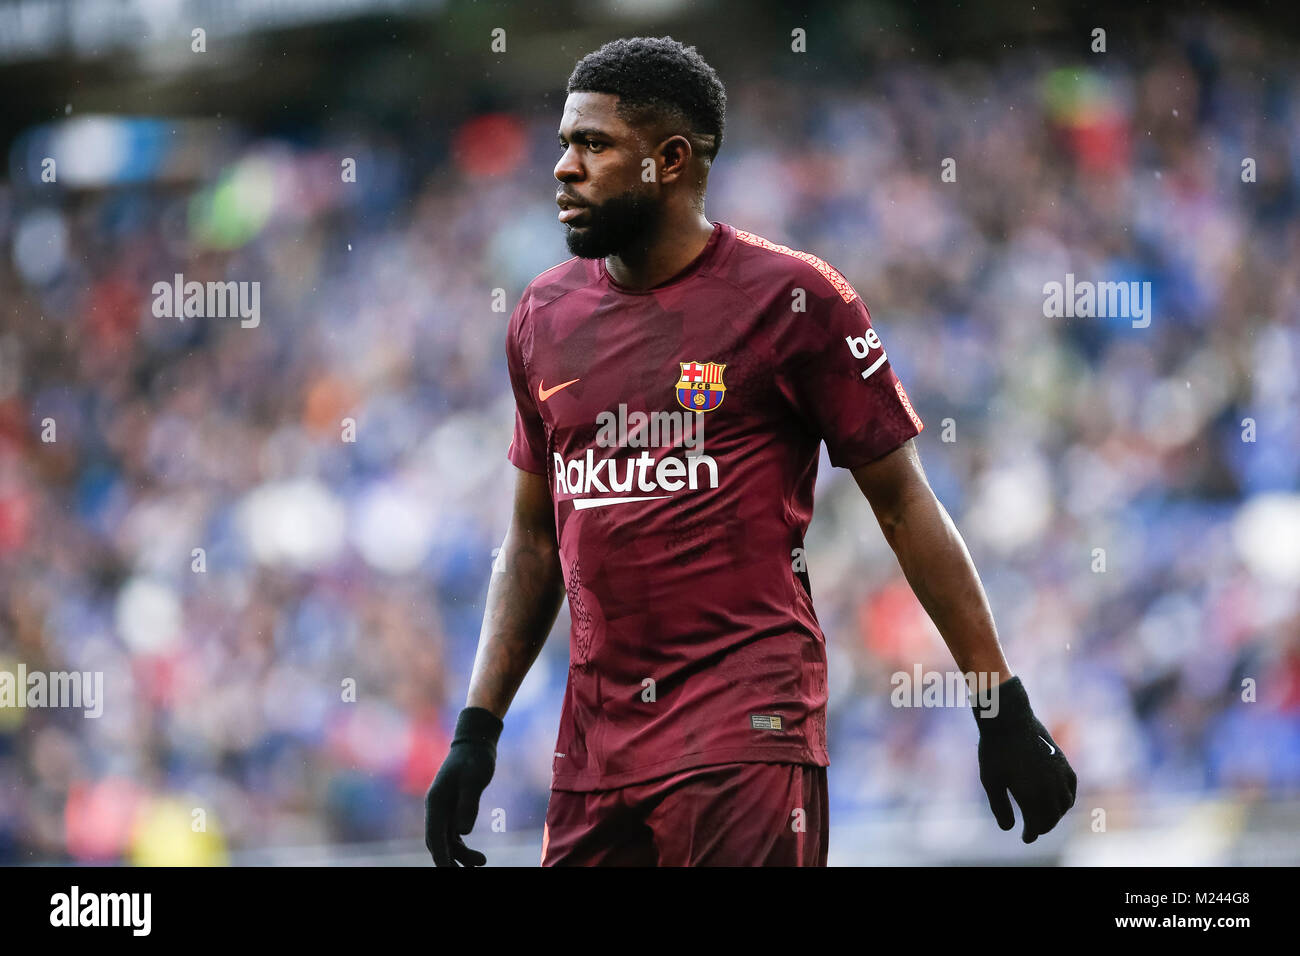 Barcelona, Spain. 04th Feb, 2018. FC Barcelona defender Samuel Umtiti (23) during the match between RCD Espanyol and FC Barcelona, for the round 22 of the Liga Santander, played at RCDE Stadium on 4th February 2018 in Barcelona, Spain. Credit: Gtres Información más Comuniación on line, S.L./Alamy Live News Stock Photo